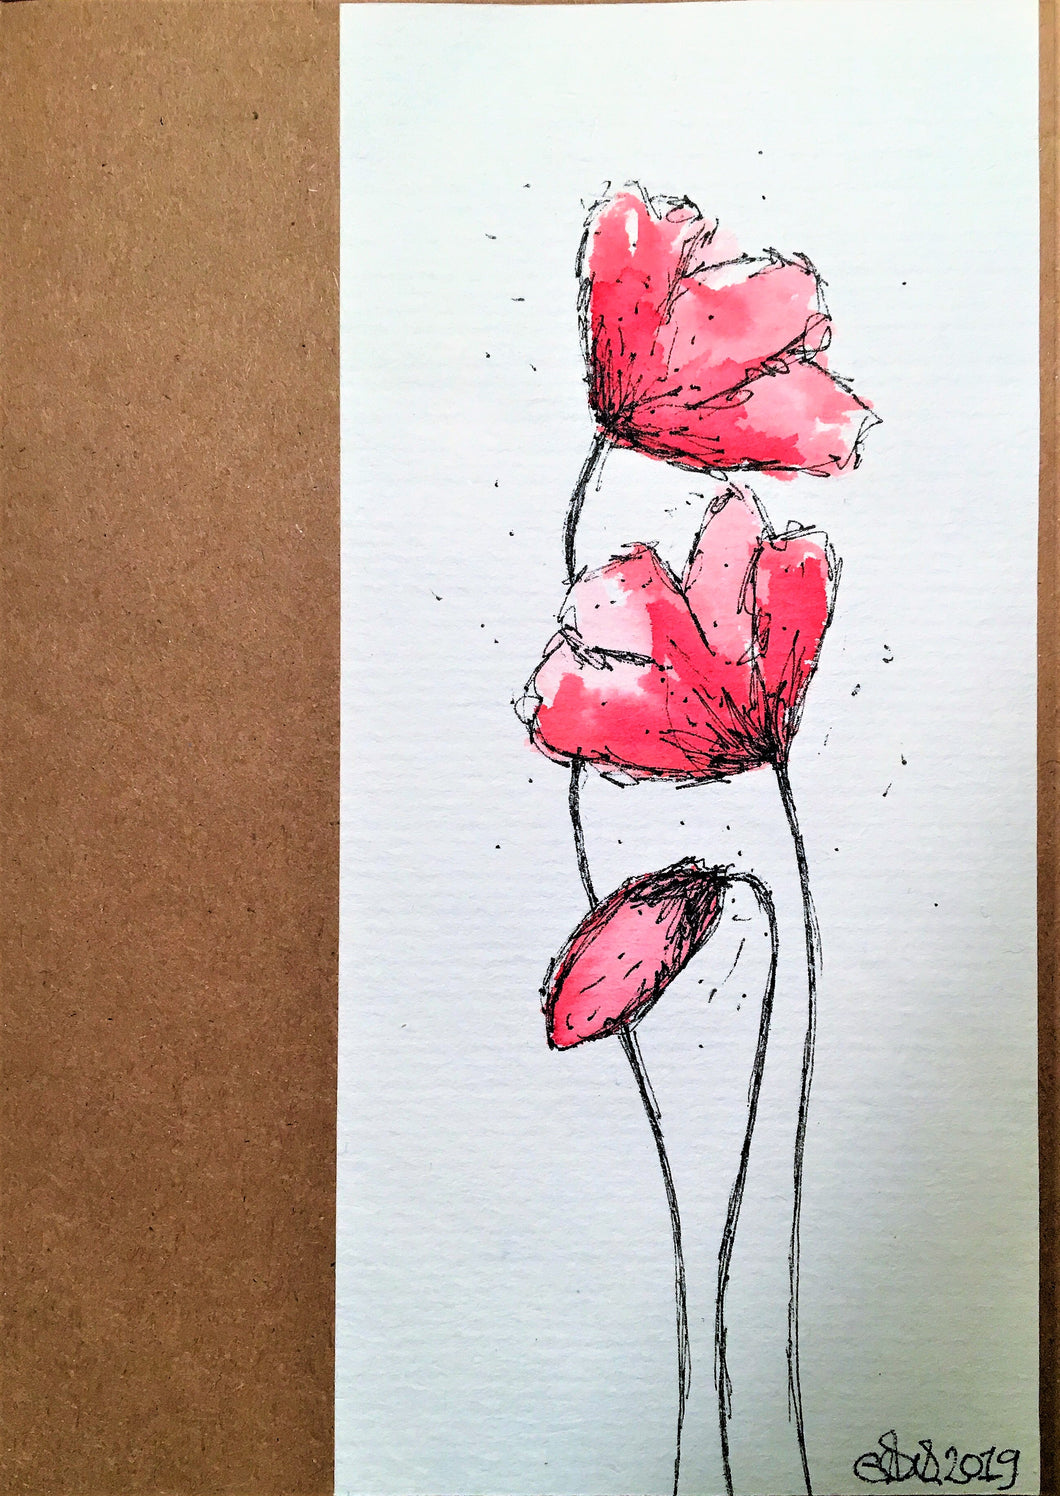 Handpainted Watercolour Greeting Card - Three Abstract Red/Pink Poppies Design - eDgE dEsiGn London